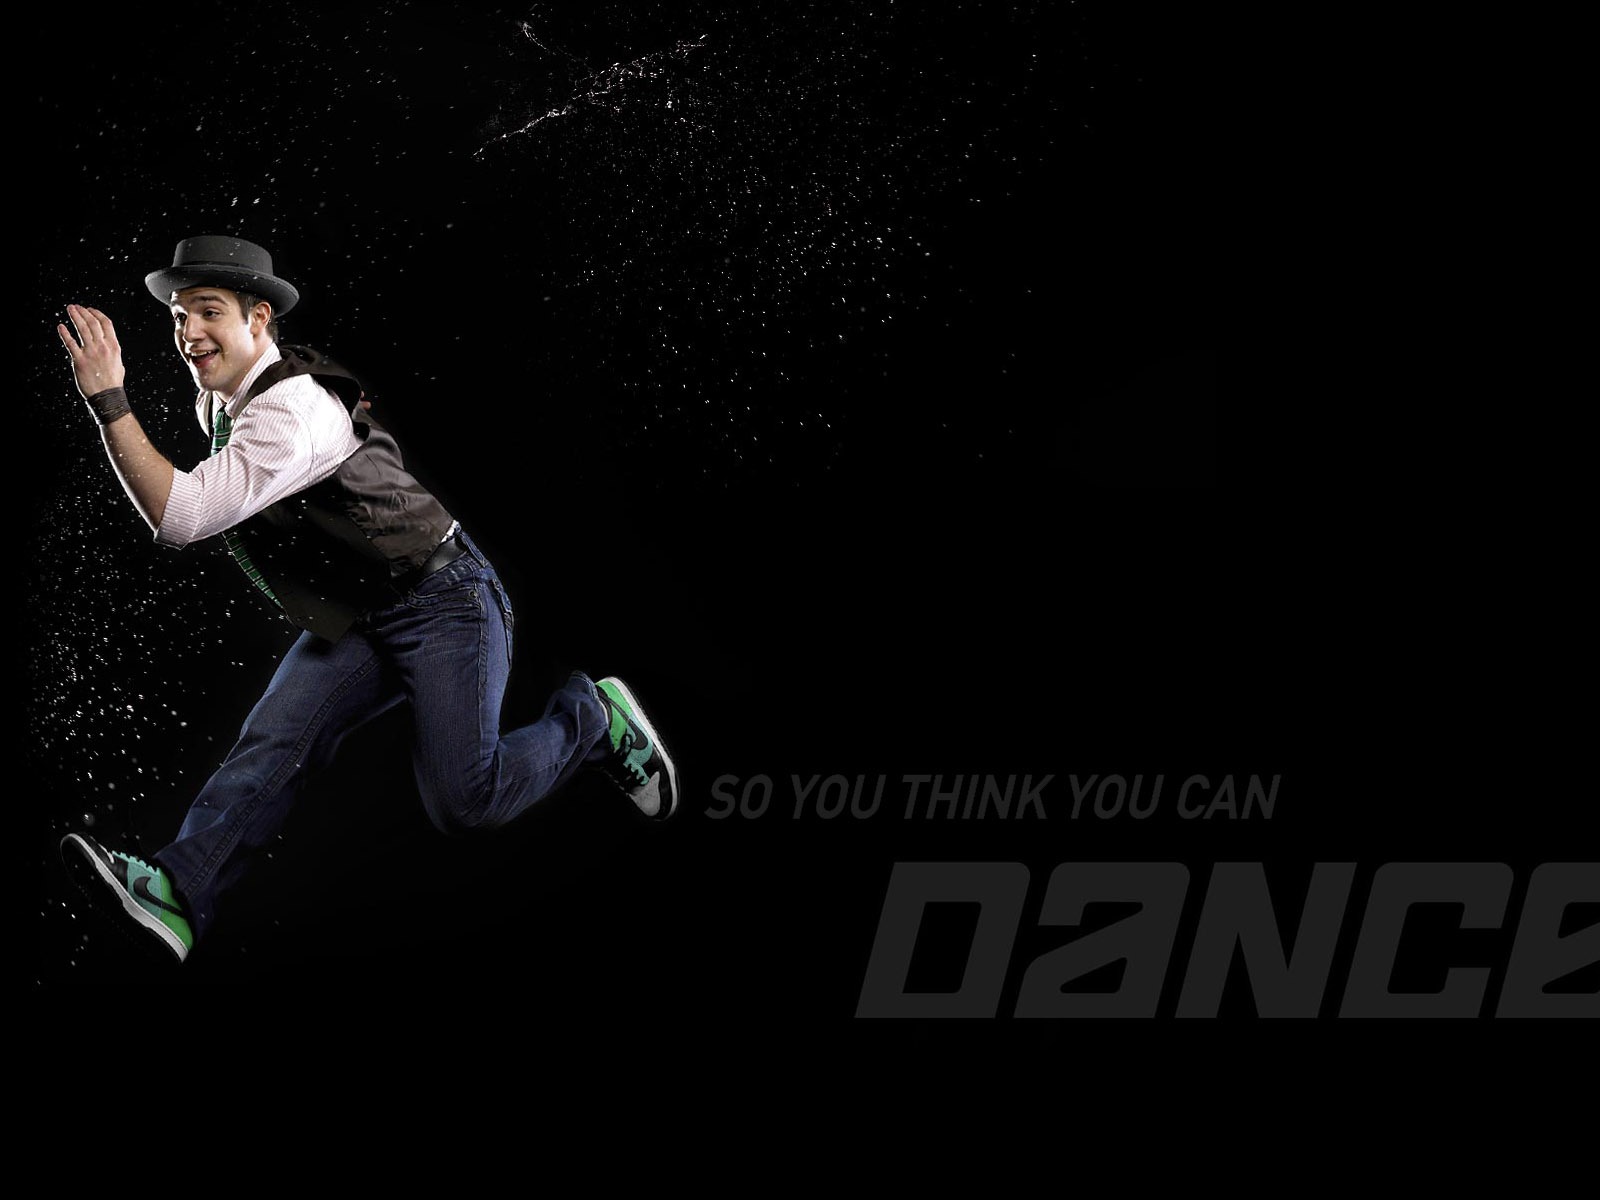 So You Think You Can Dance wallpaper (1) #14 - 1600x1200